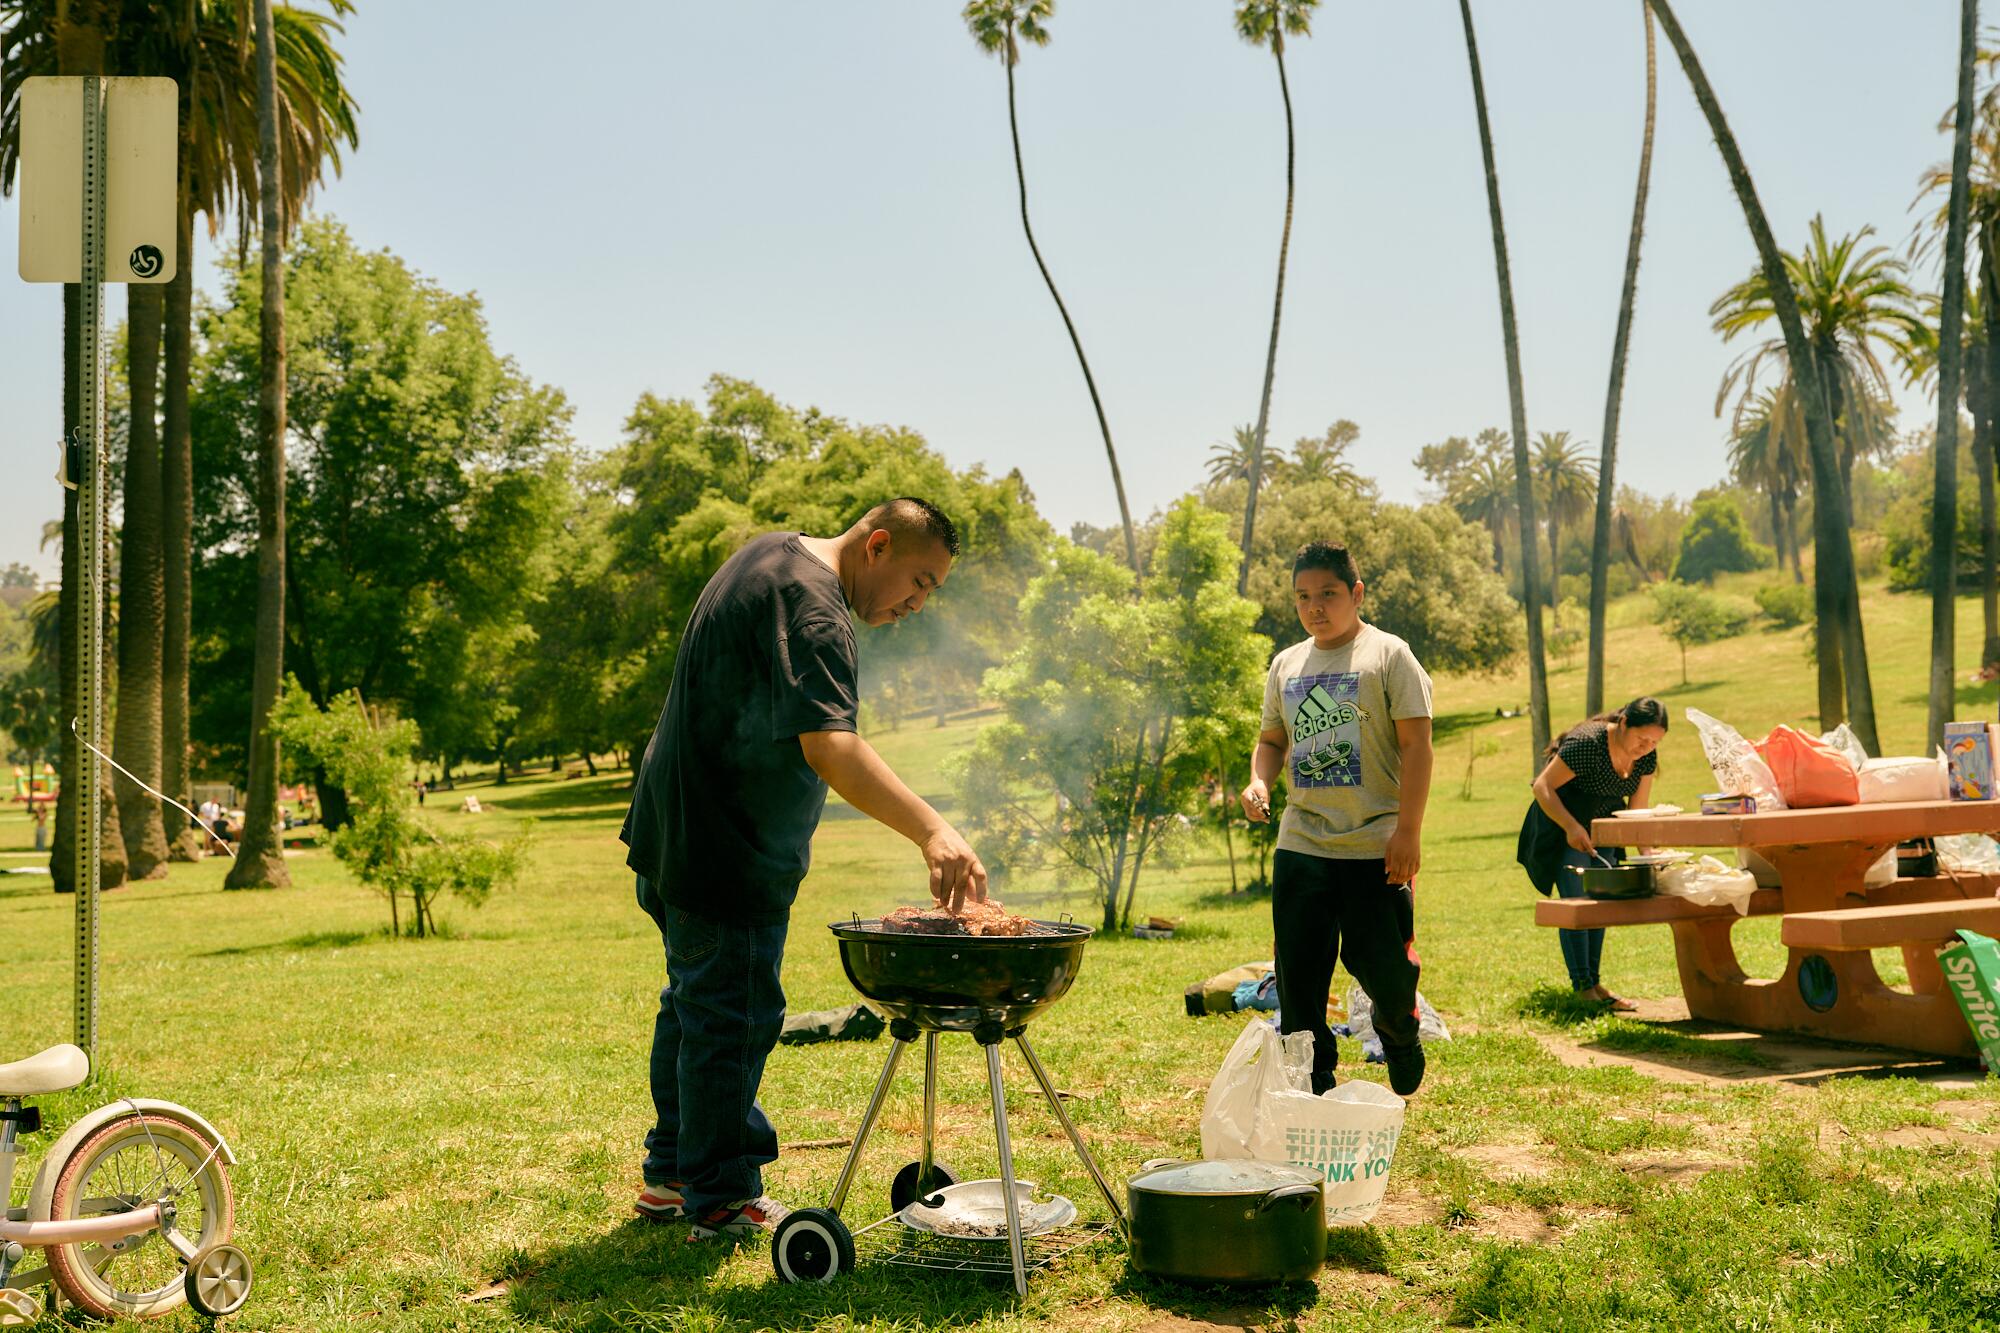 A man cooks meat on an outdoor grill next to a young boy and a woman at a picnic table.